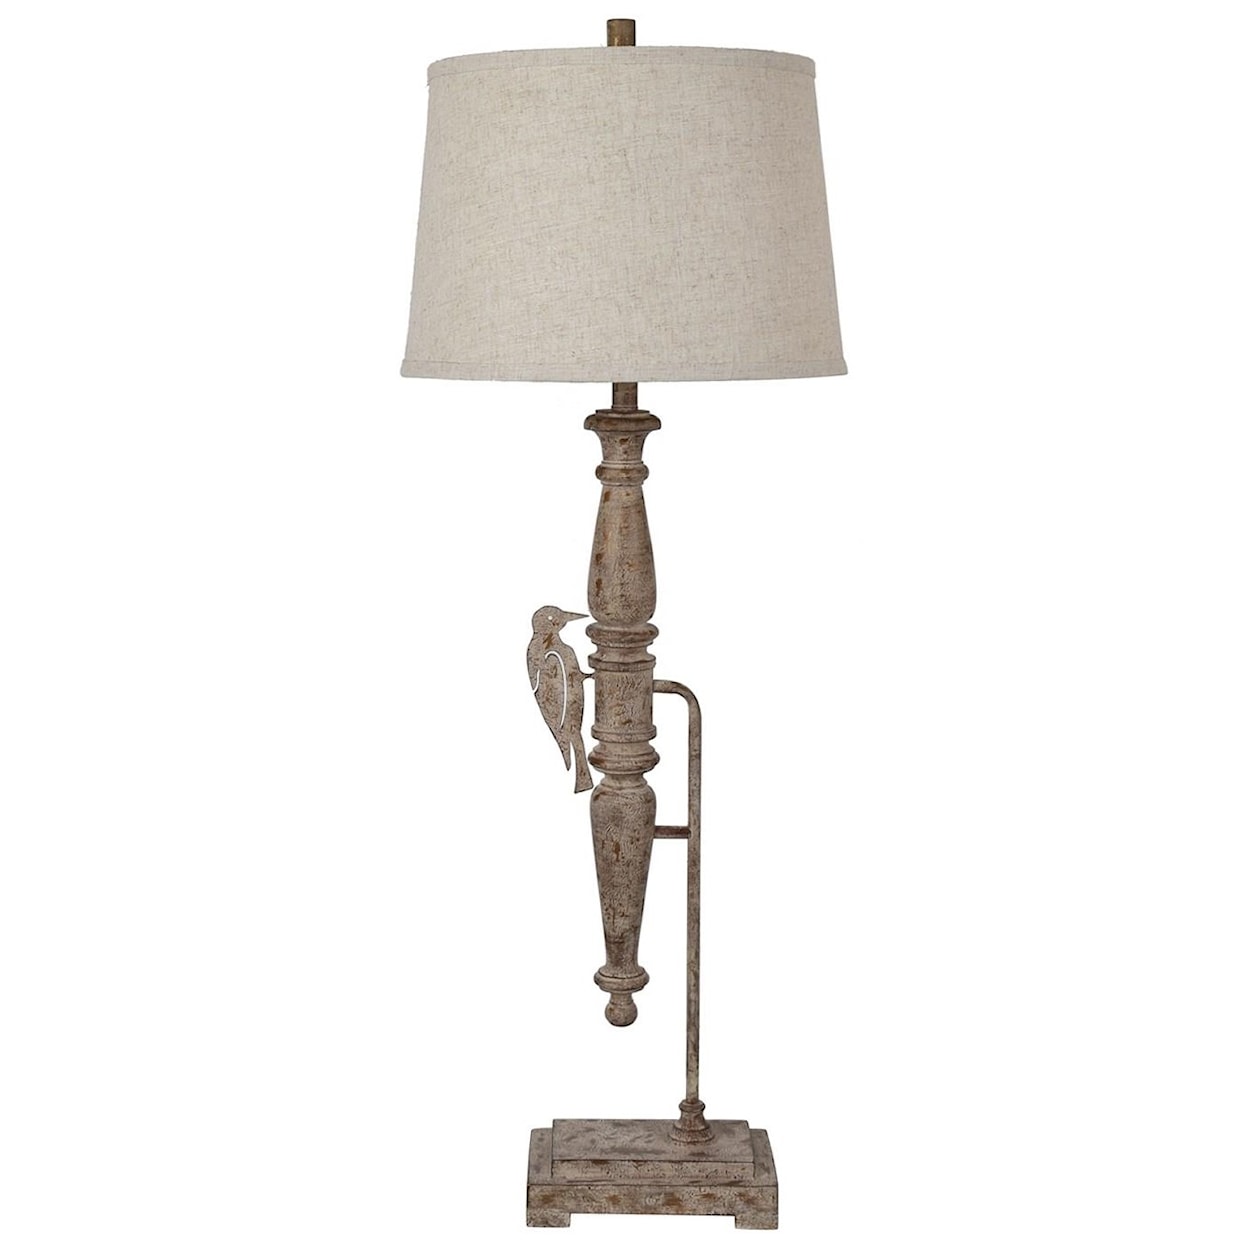 Crestview Collection Lighting Woodson Table Lamp